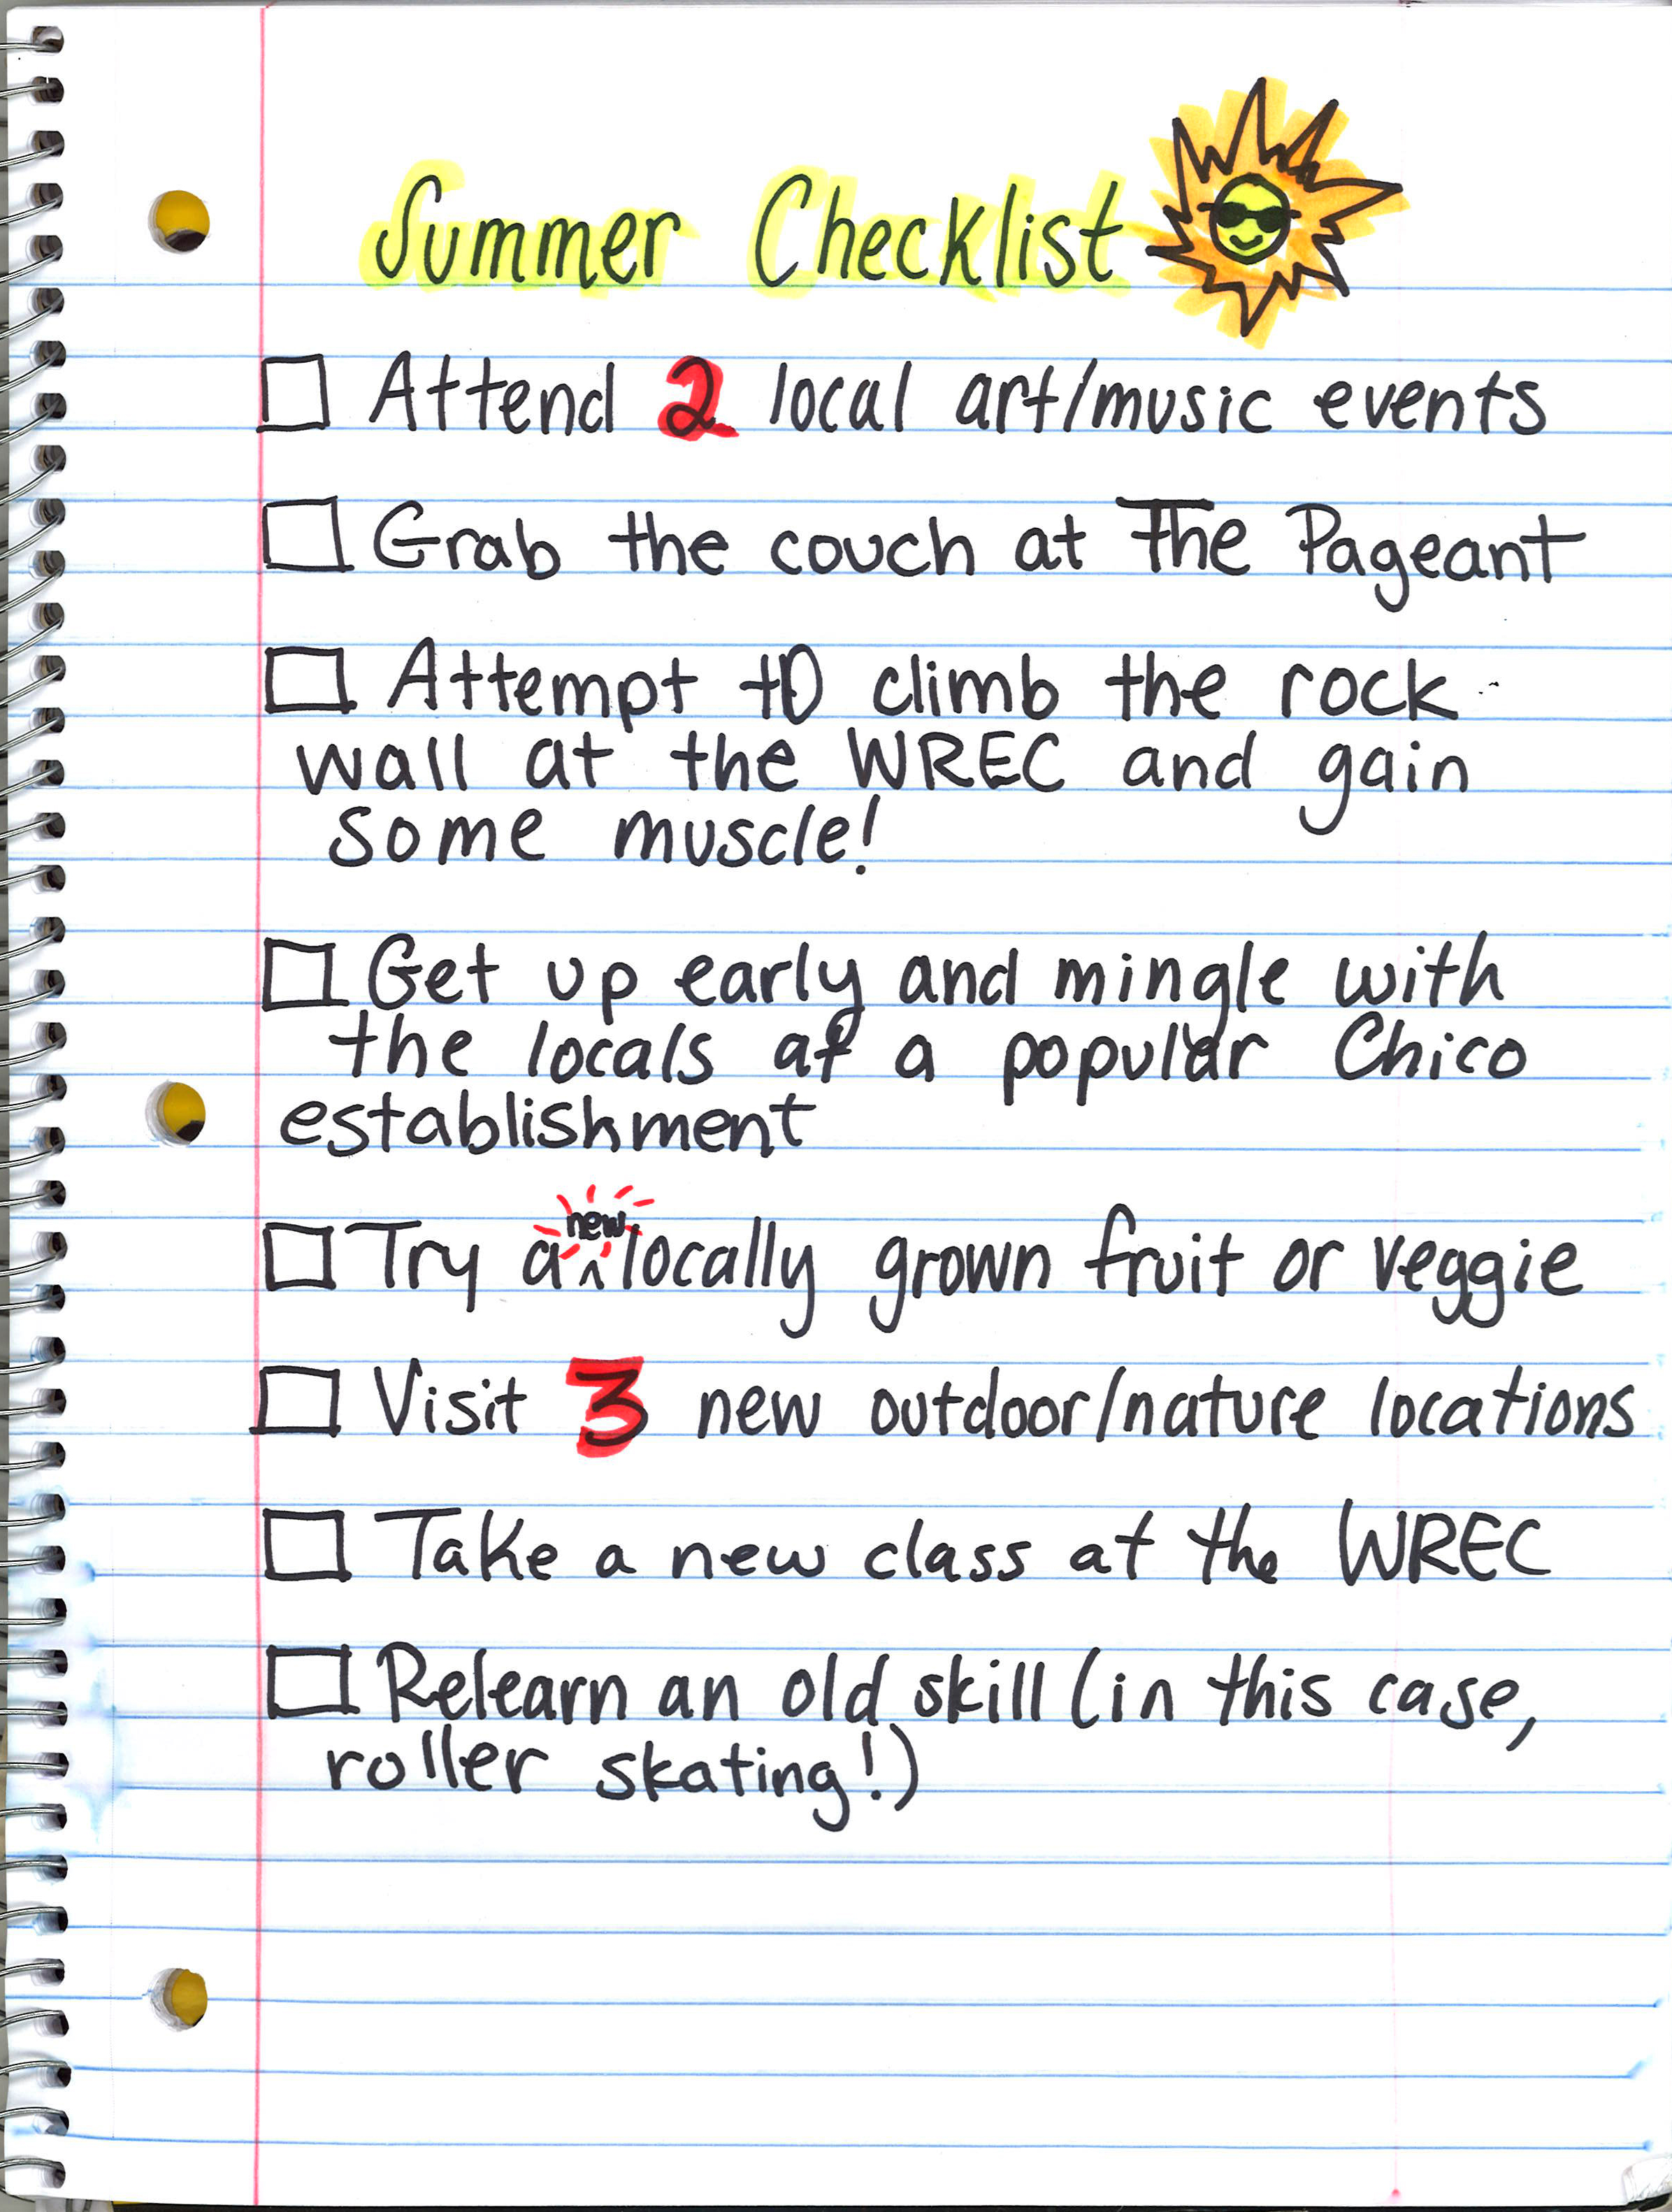 The End of Summer Checklist